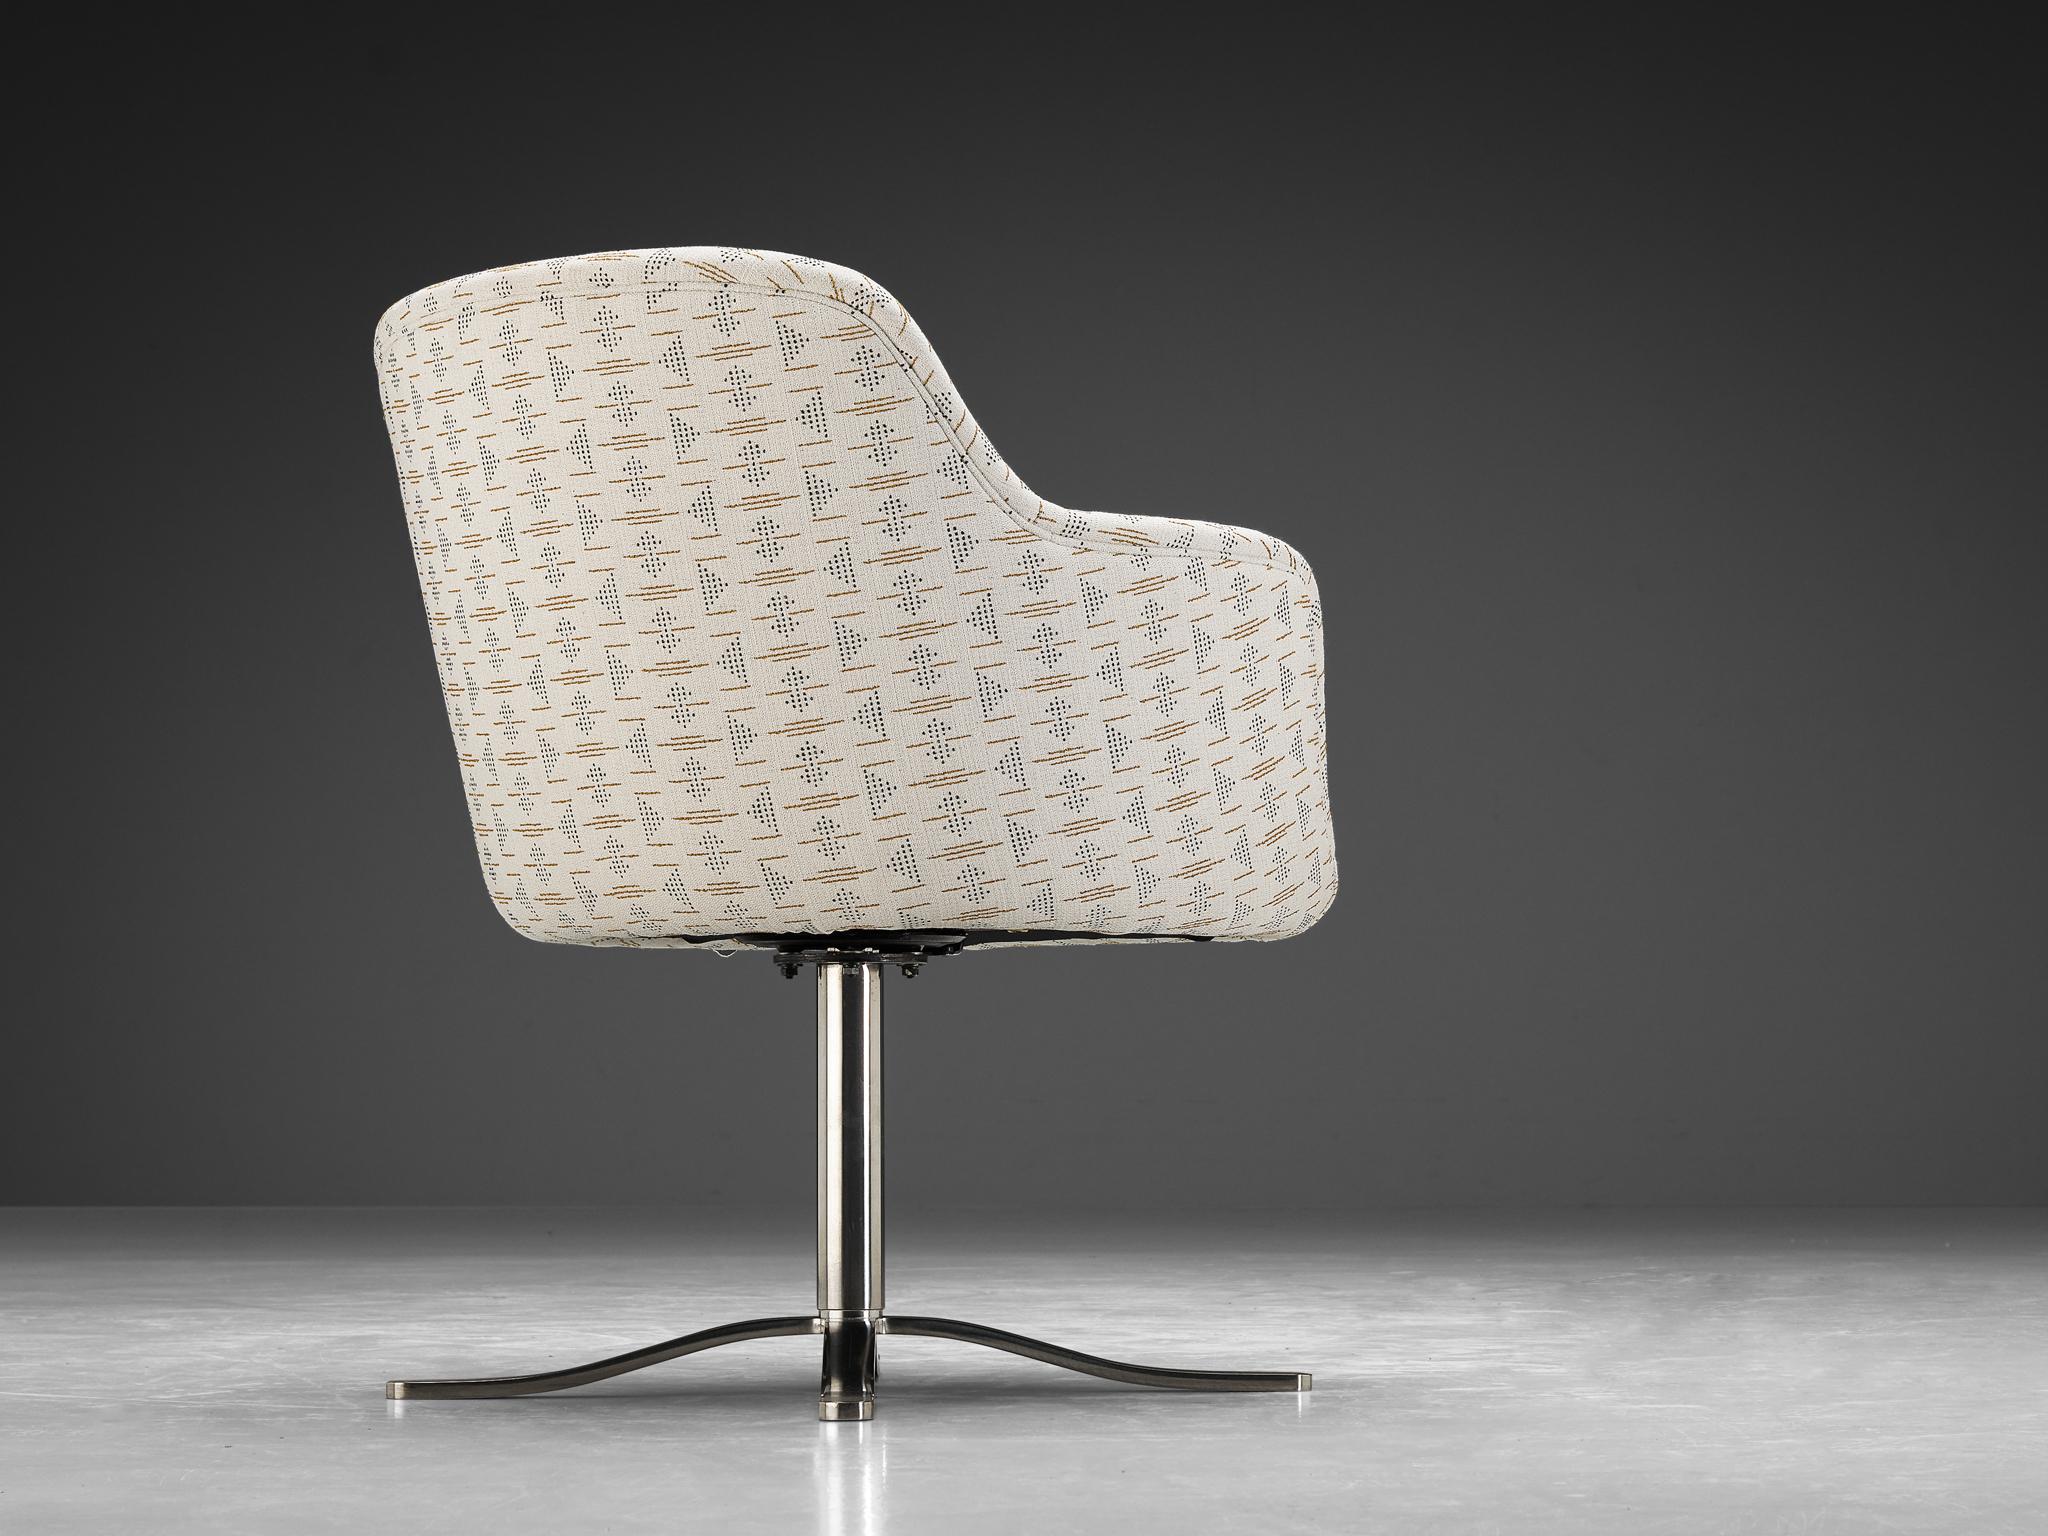 Nicos Zographos 'Bucket' Dining Chair in Patterned Upholstery  2